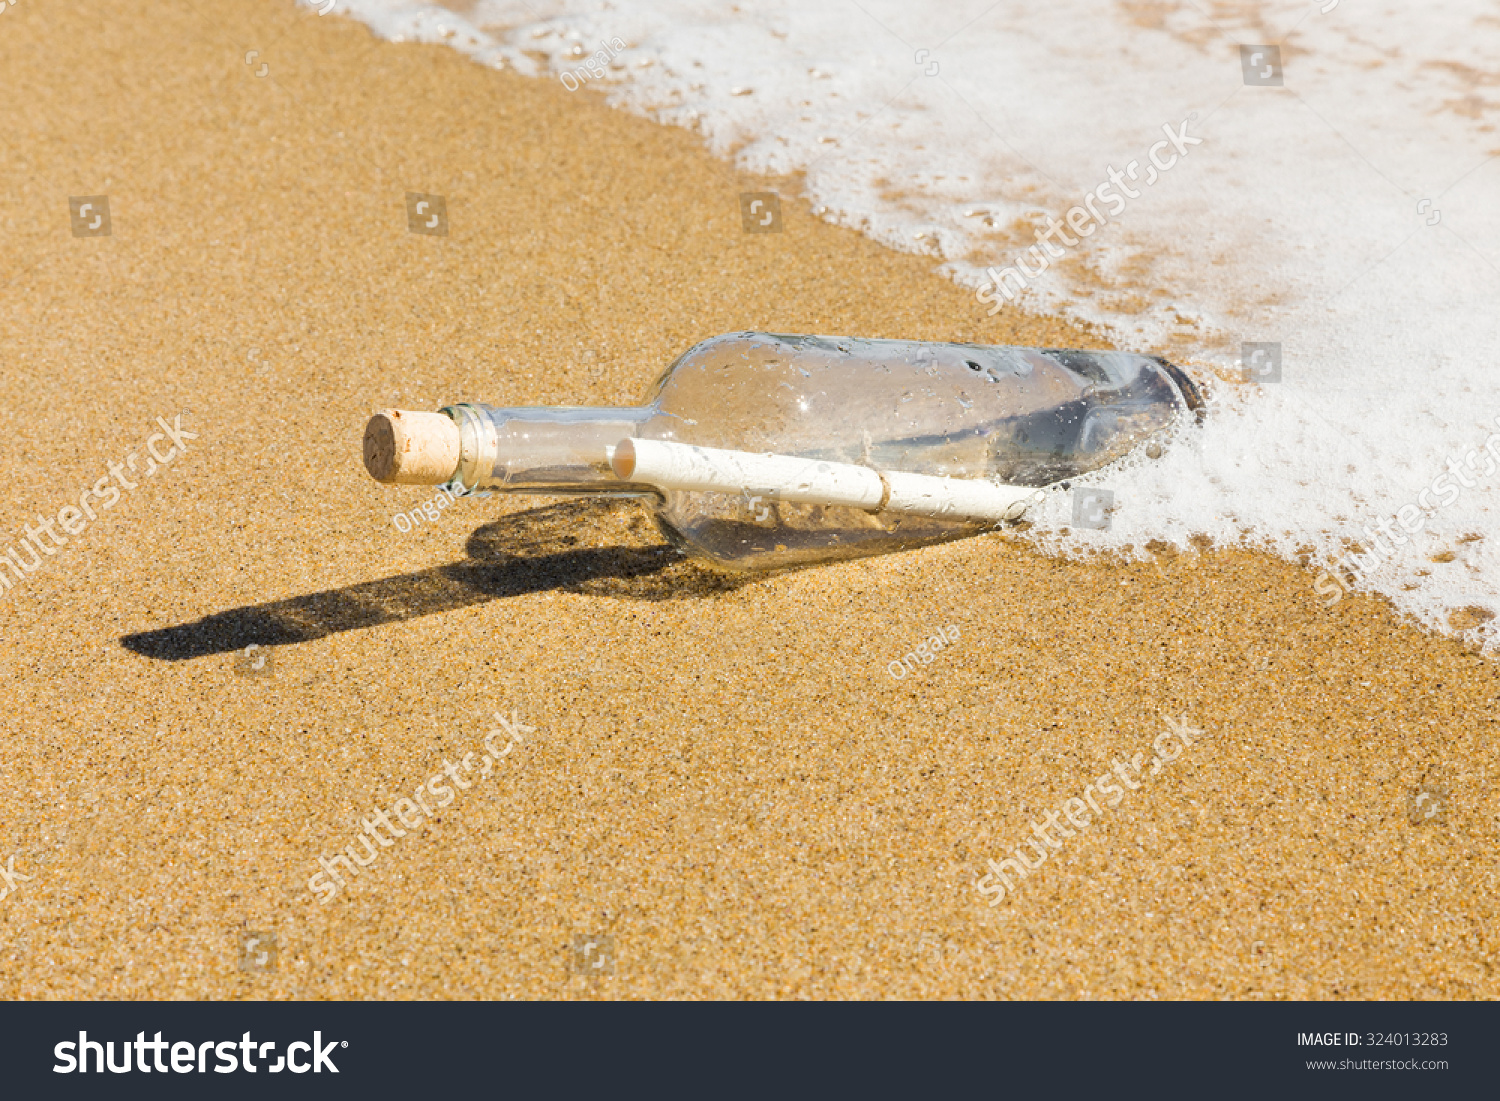 Message in a bottle washed up by the sea lying half submerged in the golden beach sand on the edge of the surf in a conceptual image of romance or a shipwreck. #324013283